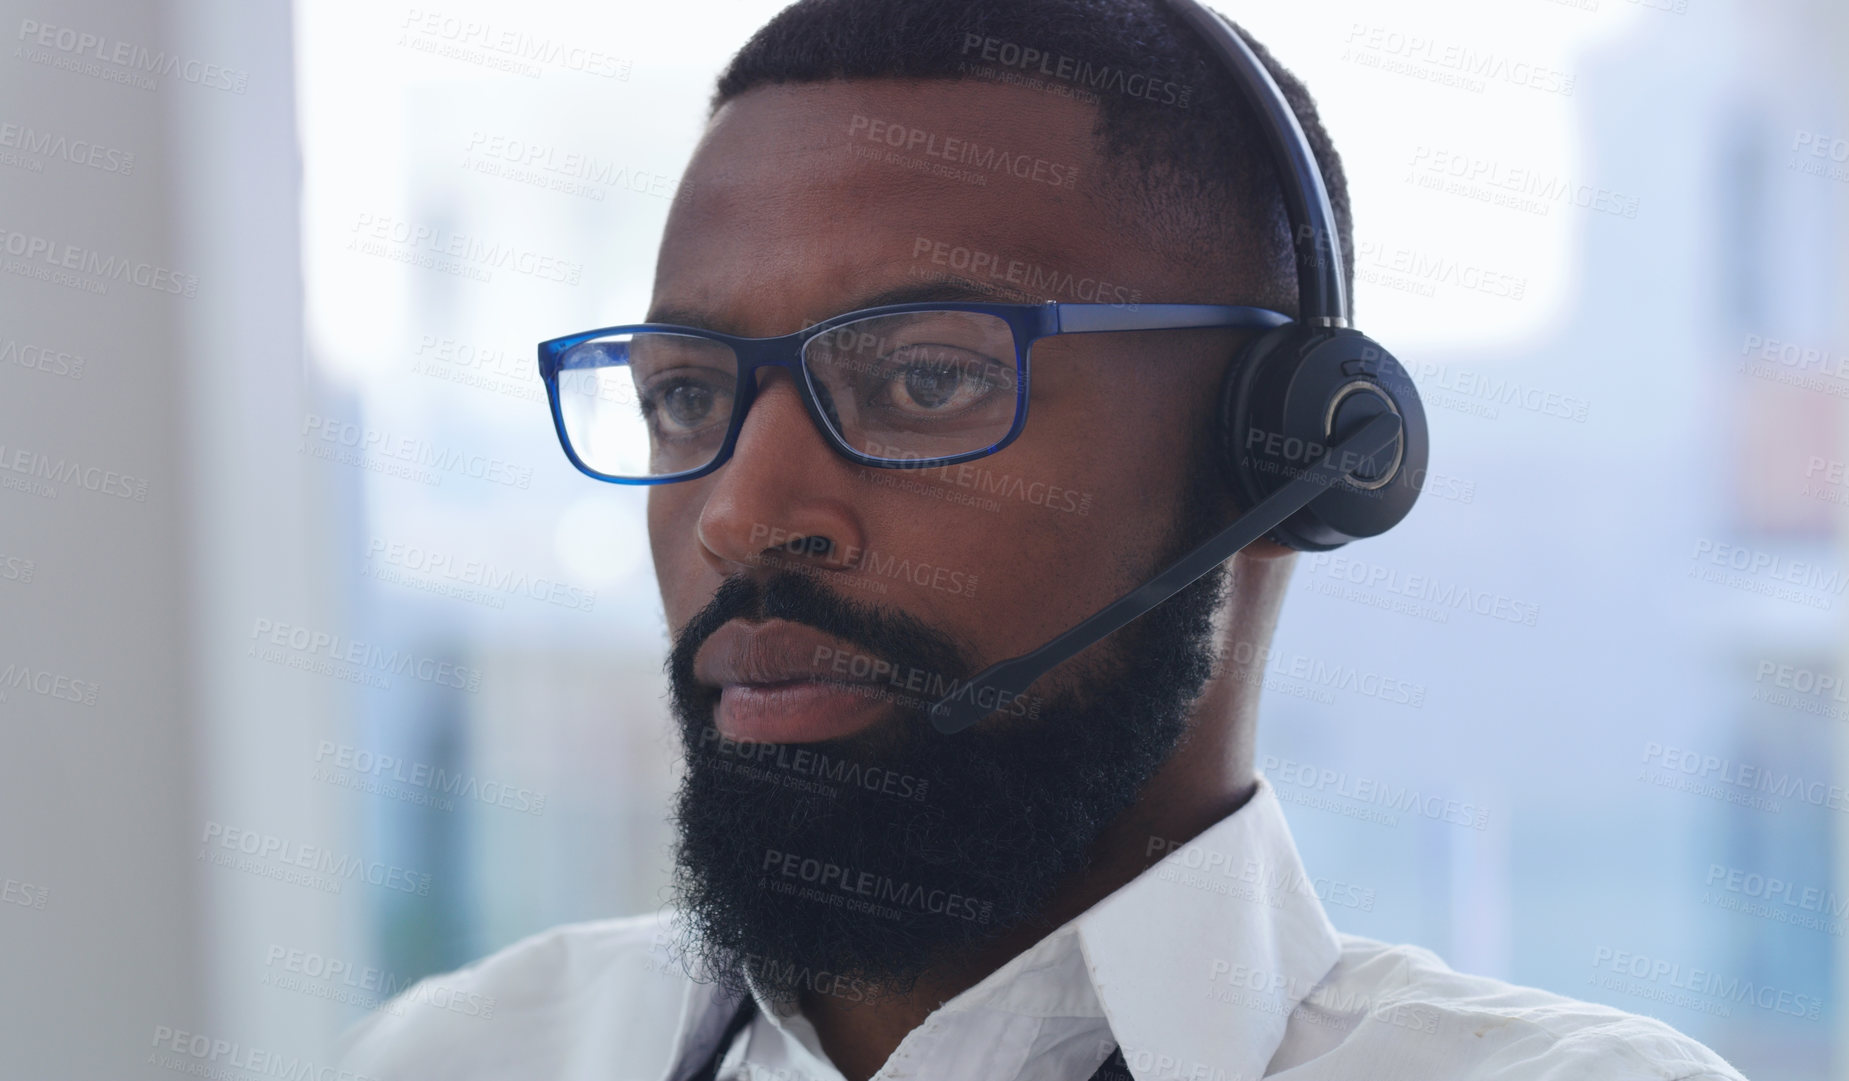 Buy stock photo Shot of a young businessman wearing a headset while working in an office